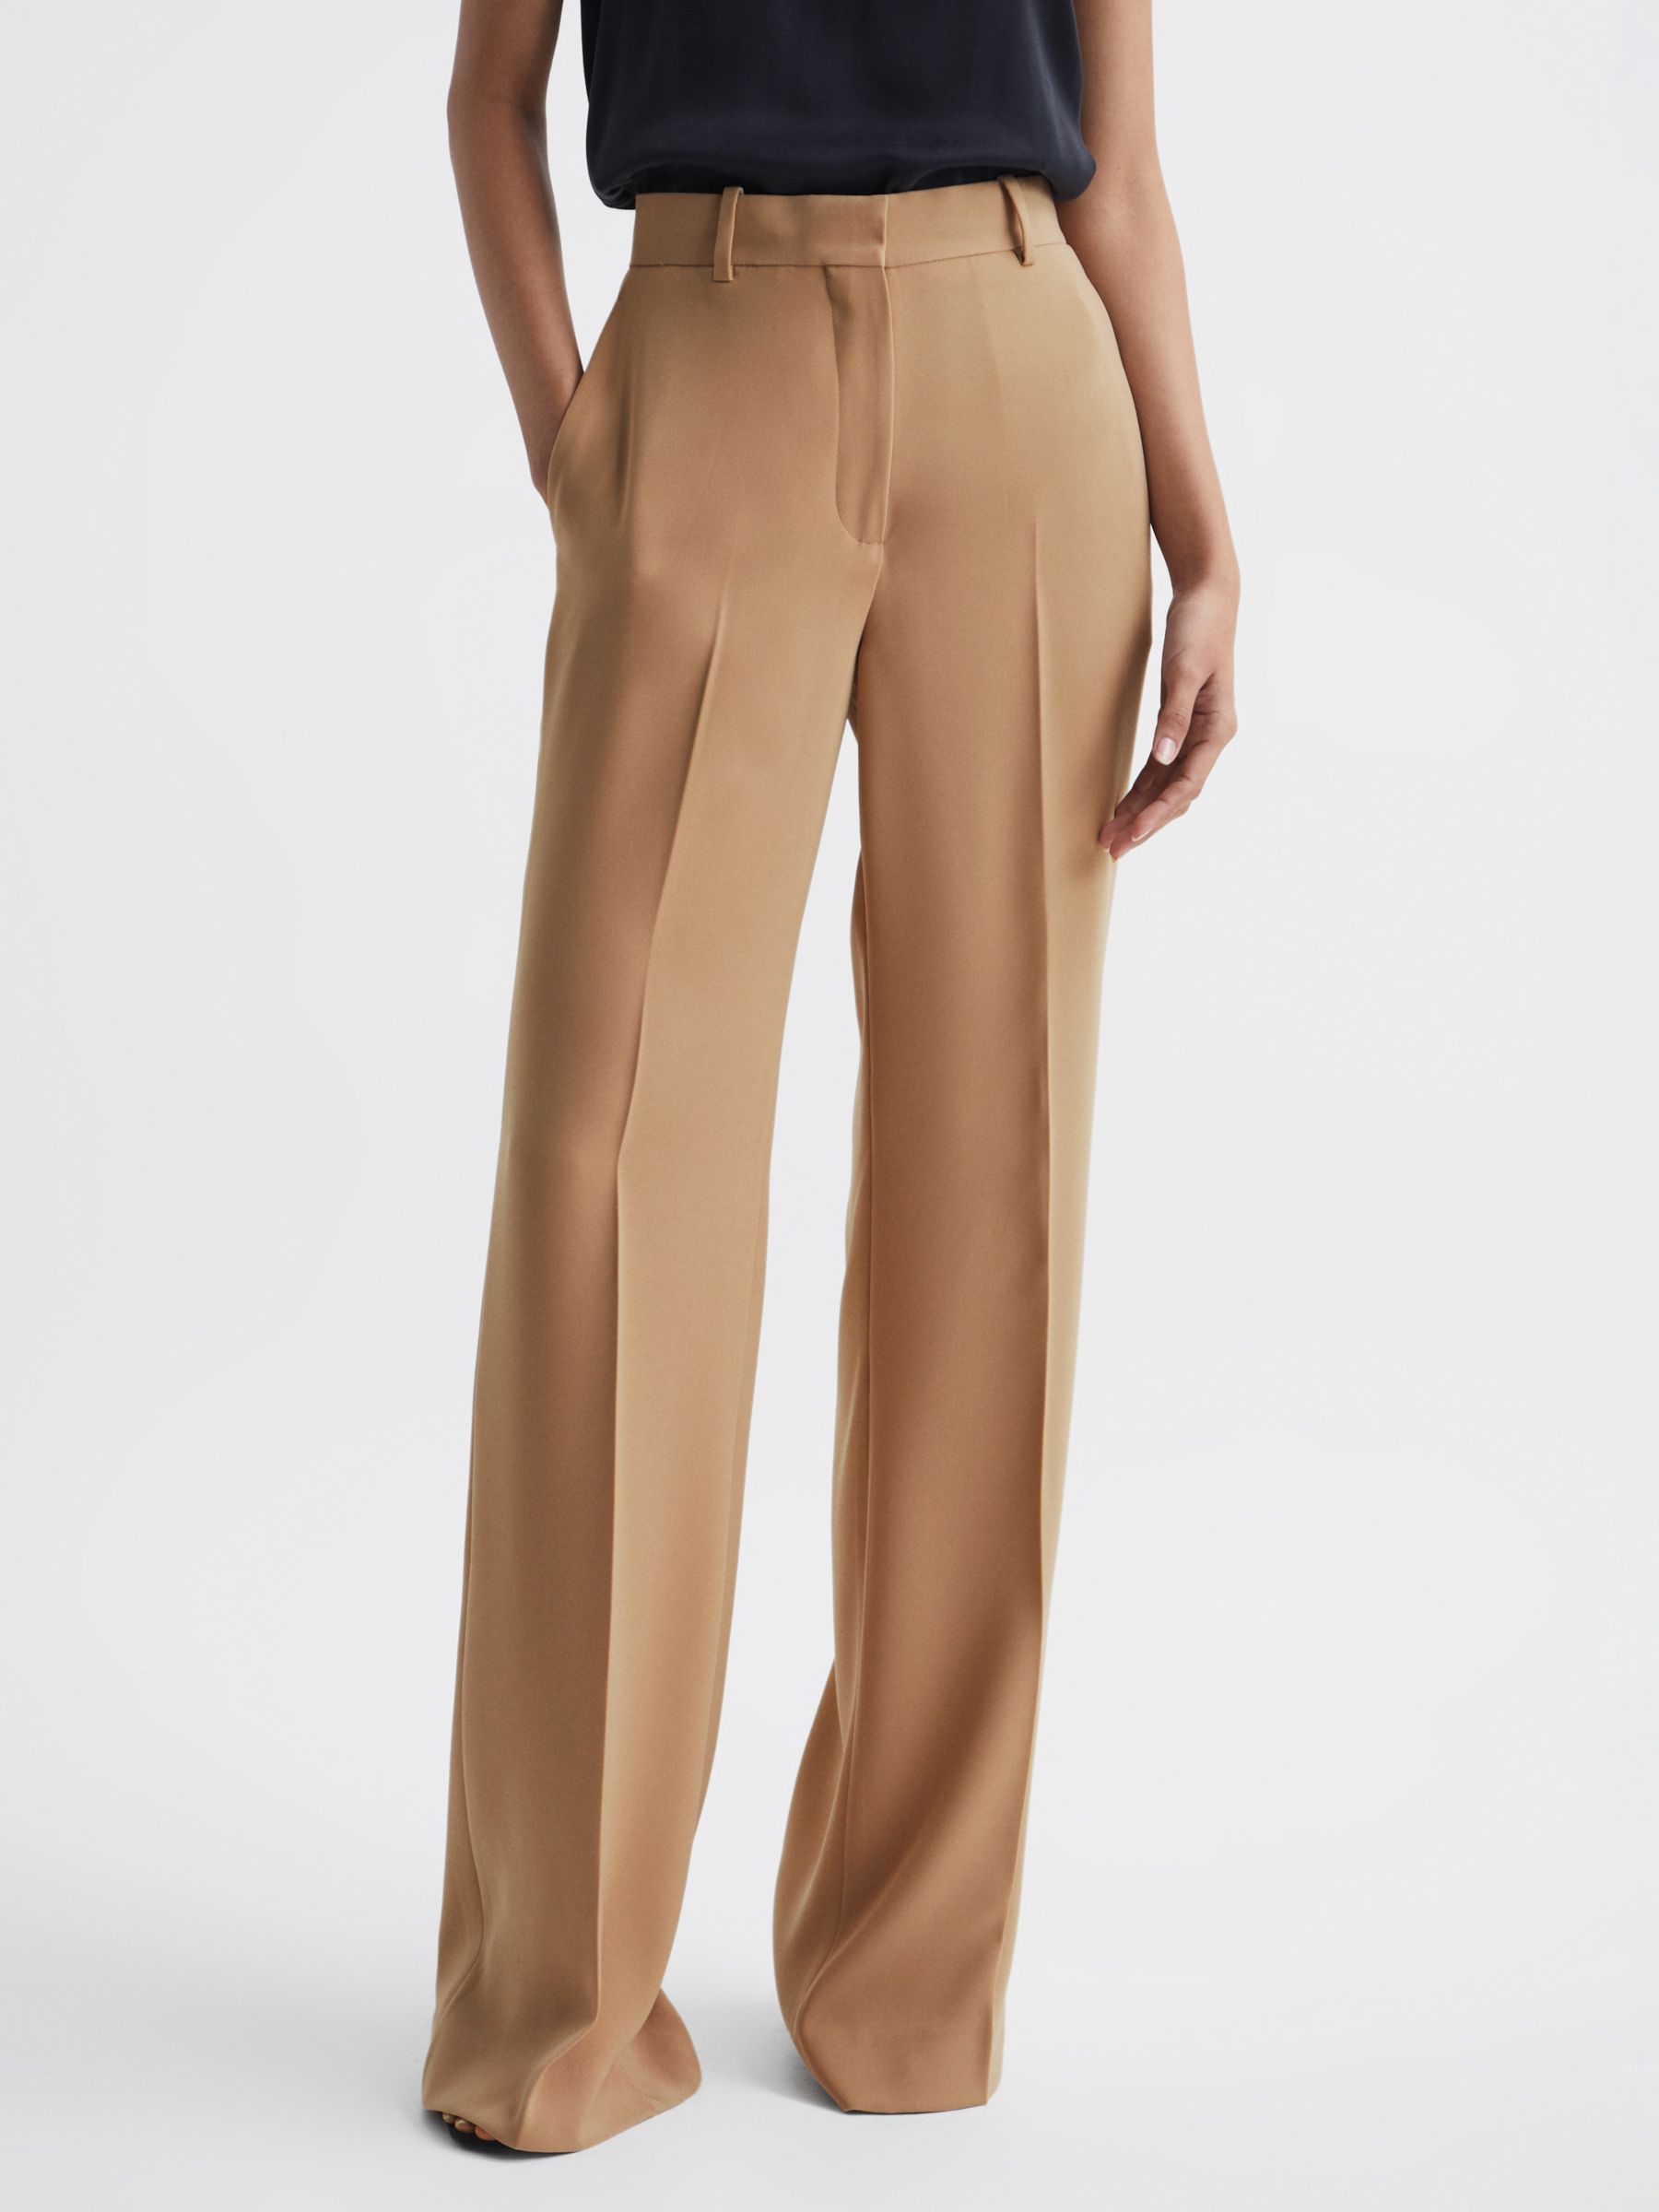 Reiss Margeaux Tailored Trousers, Neutral at John Lewis & Partners